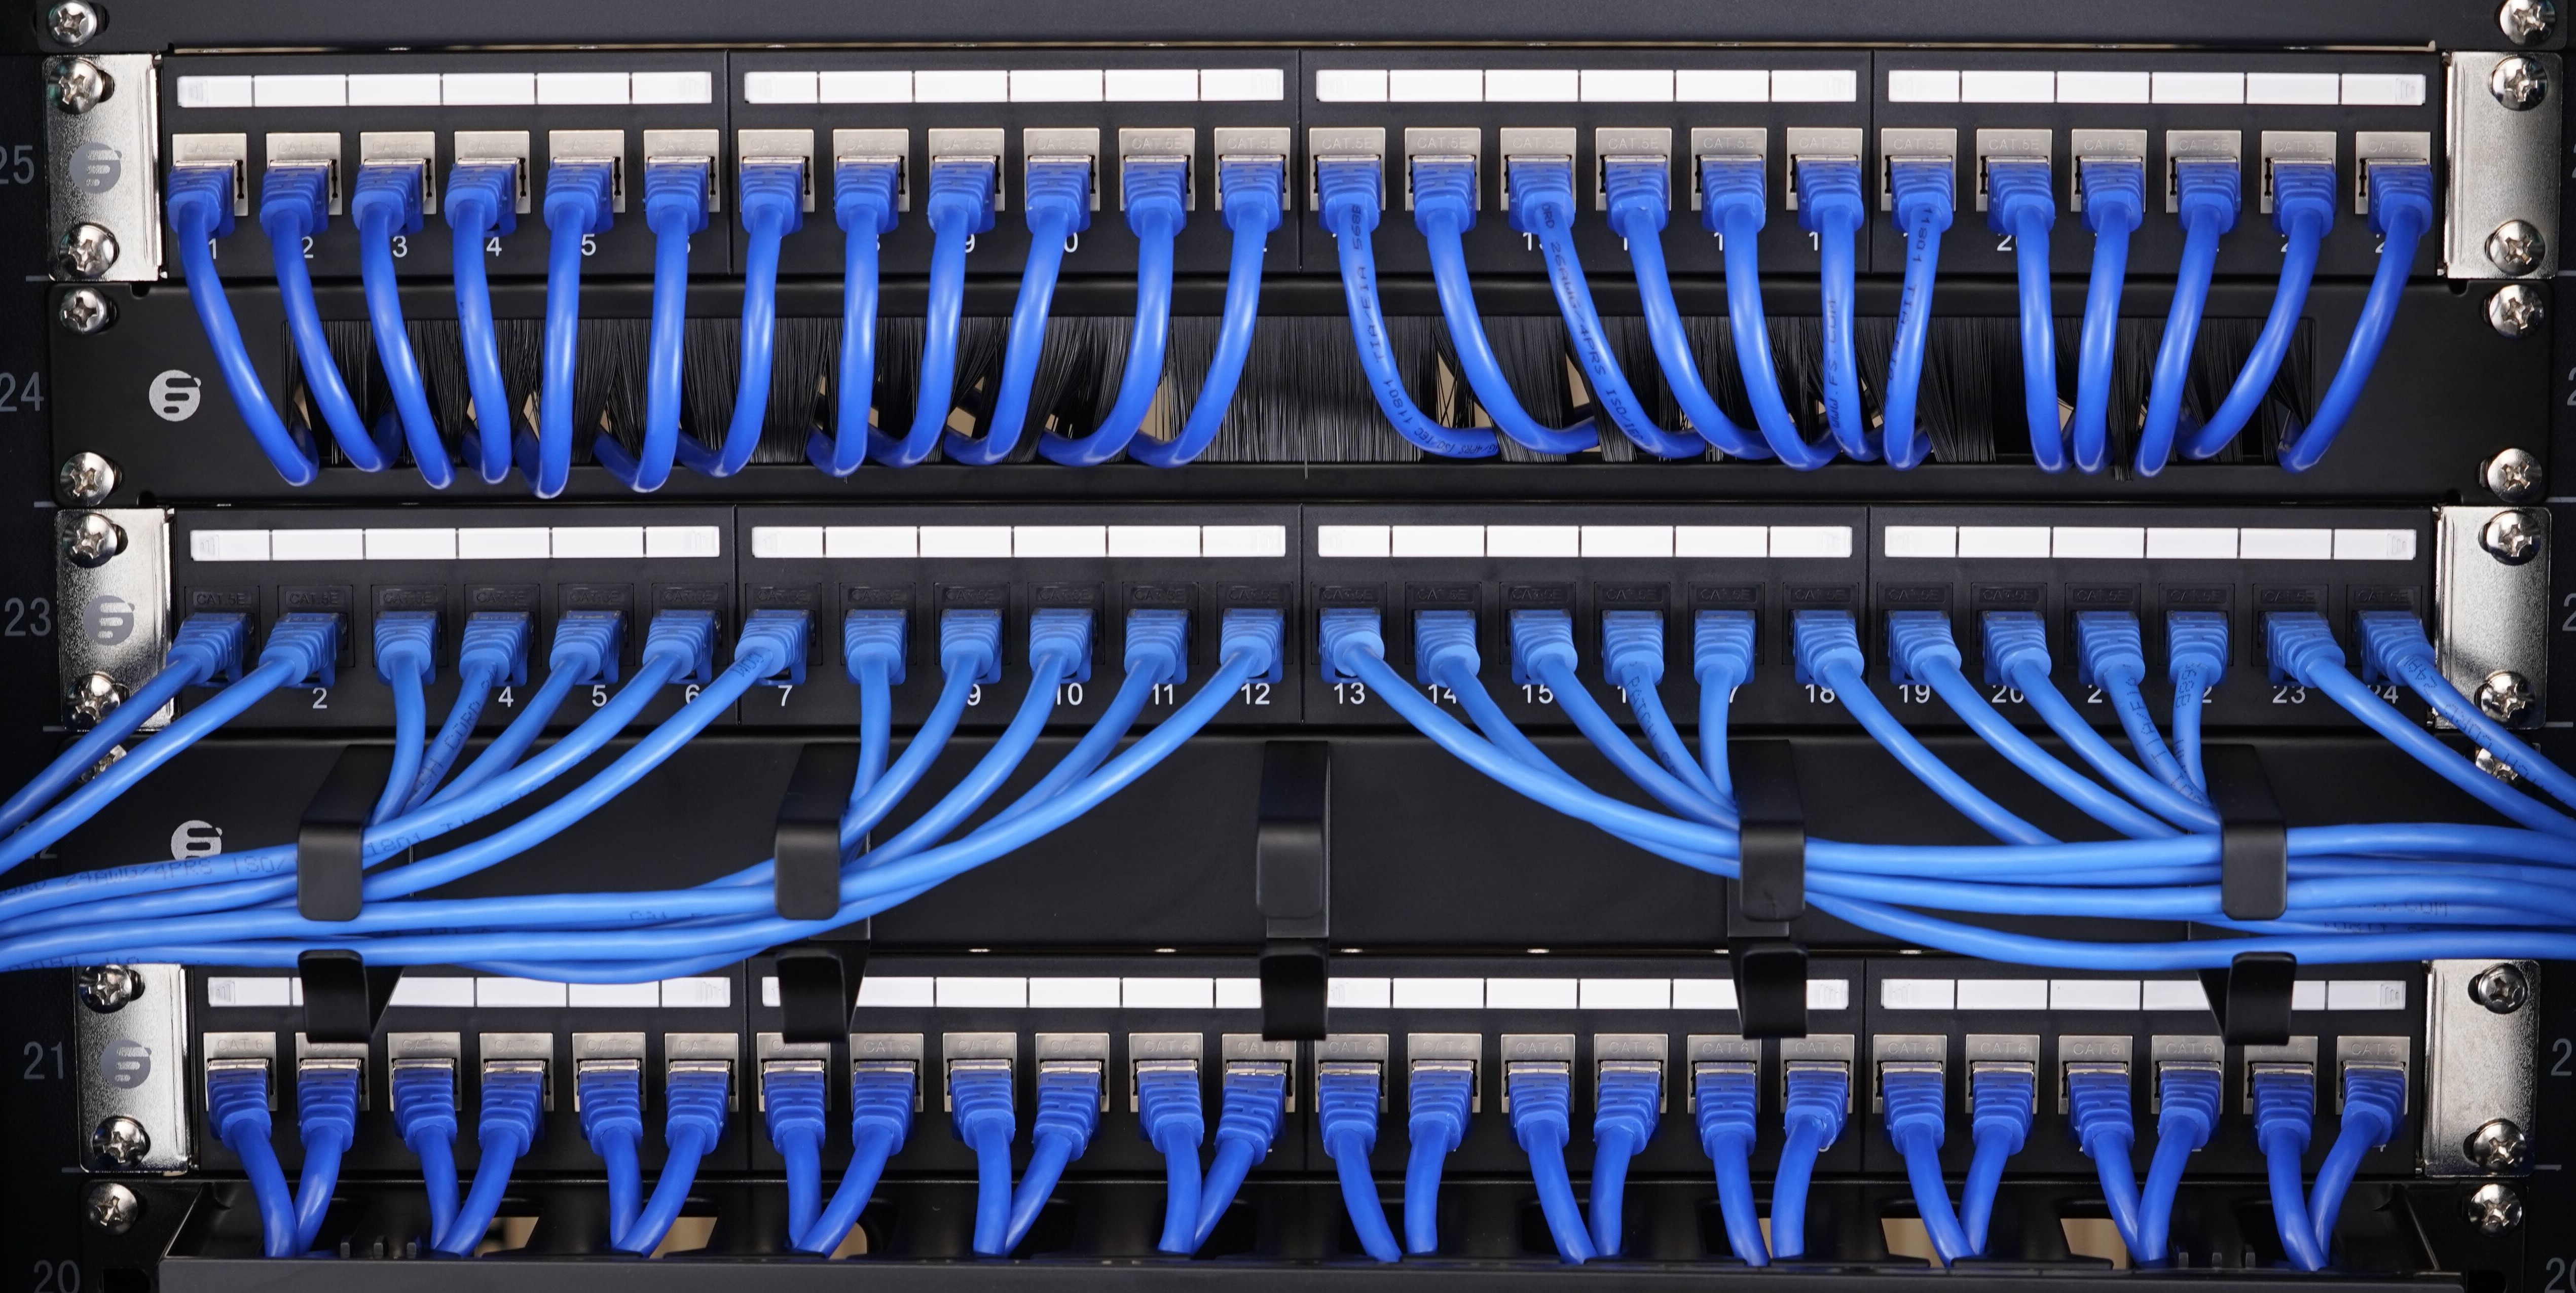 How to Connect Patch Panel to Switch?